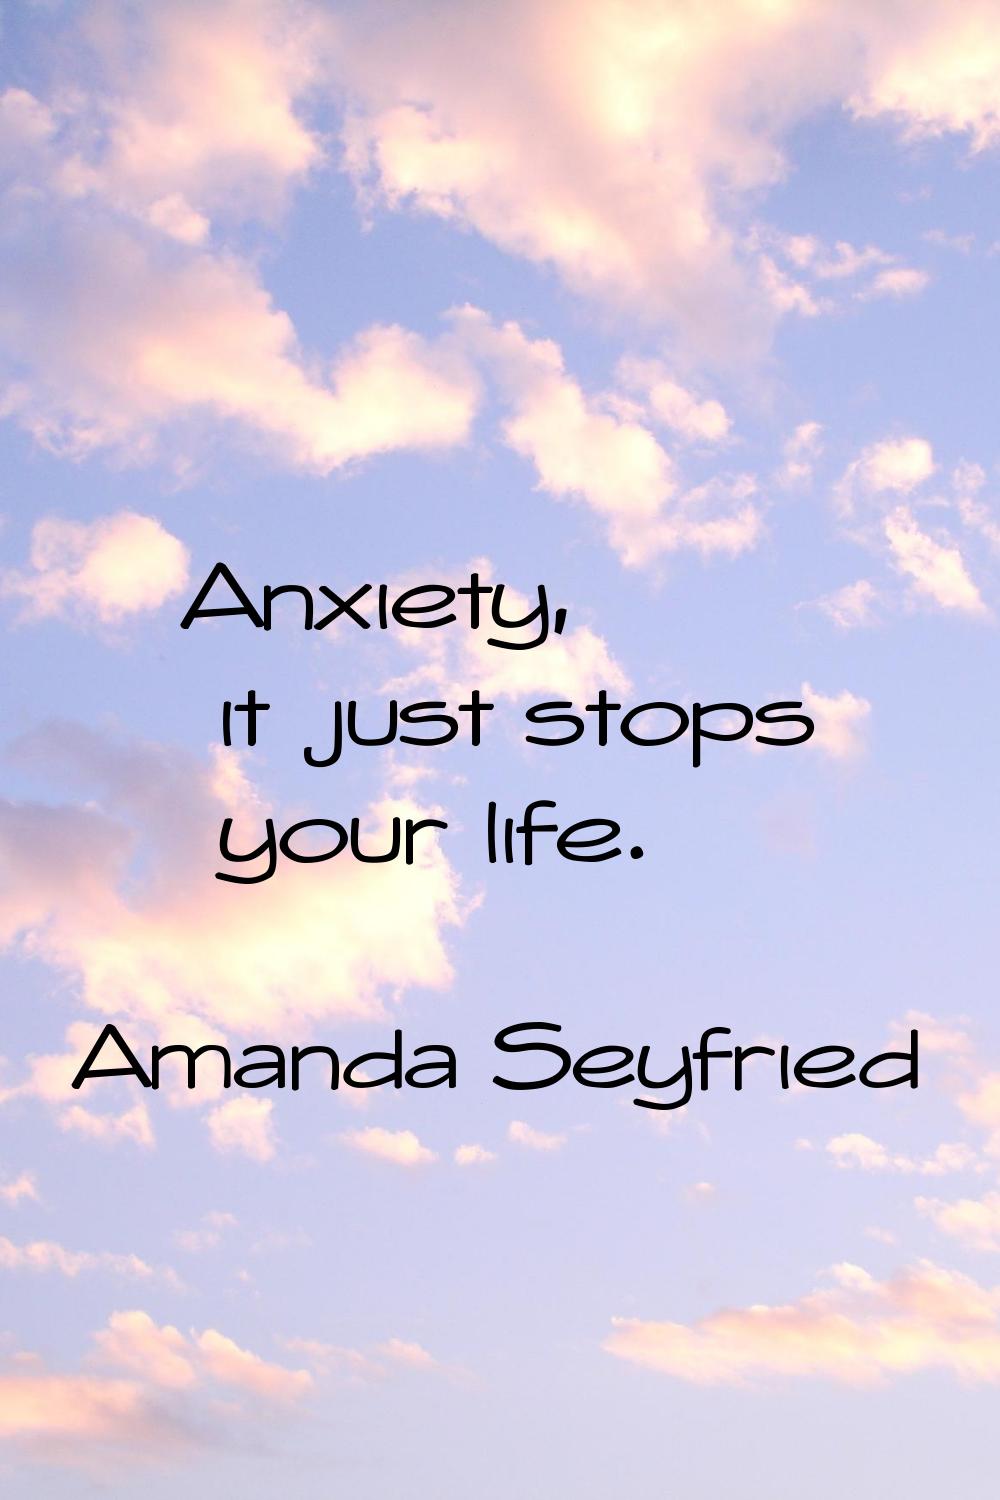 Anxiety, it just stops your life.